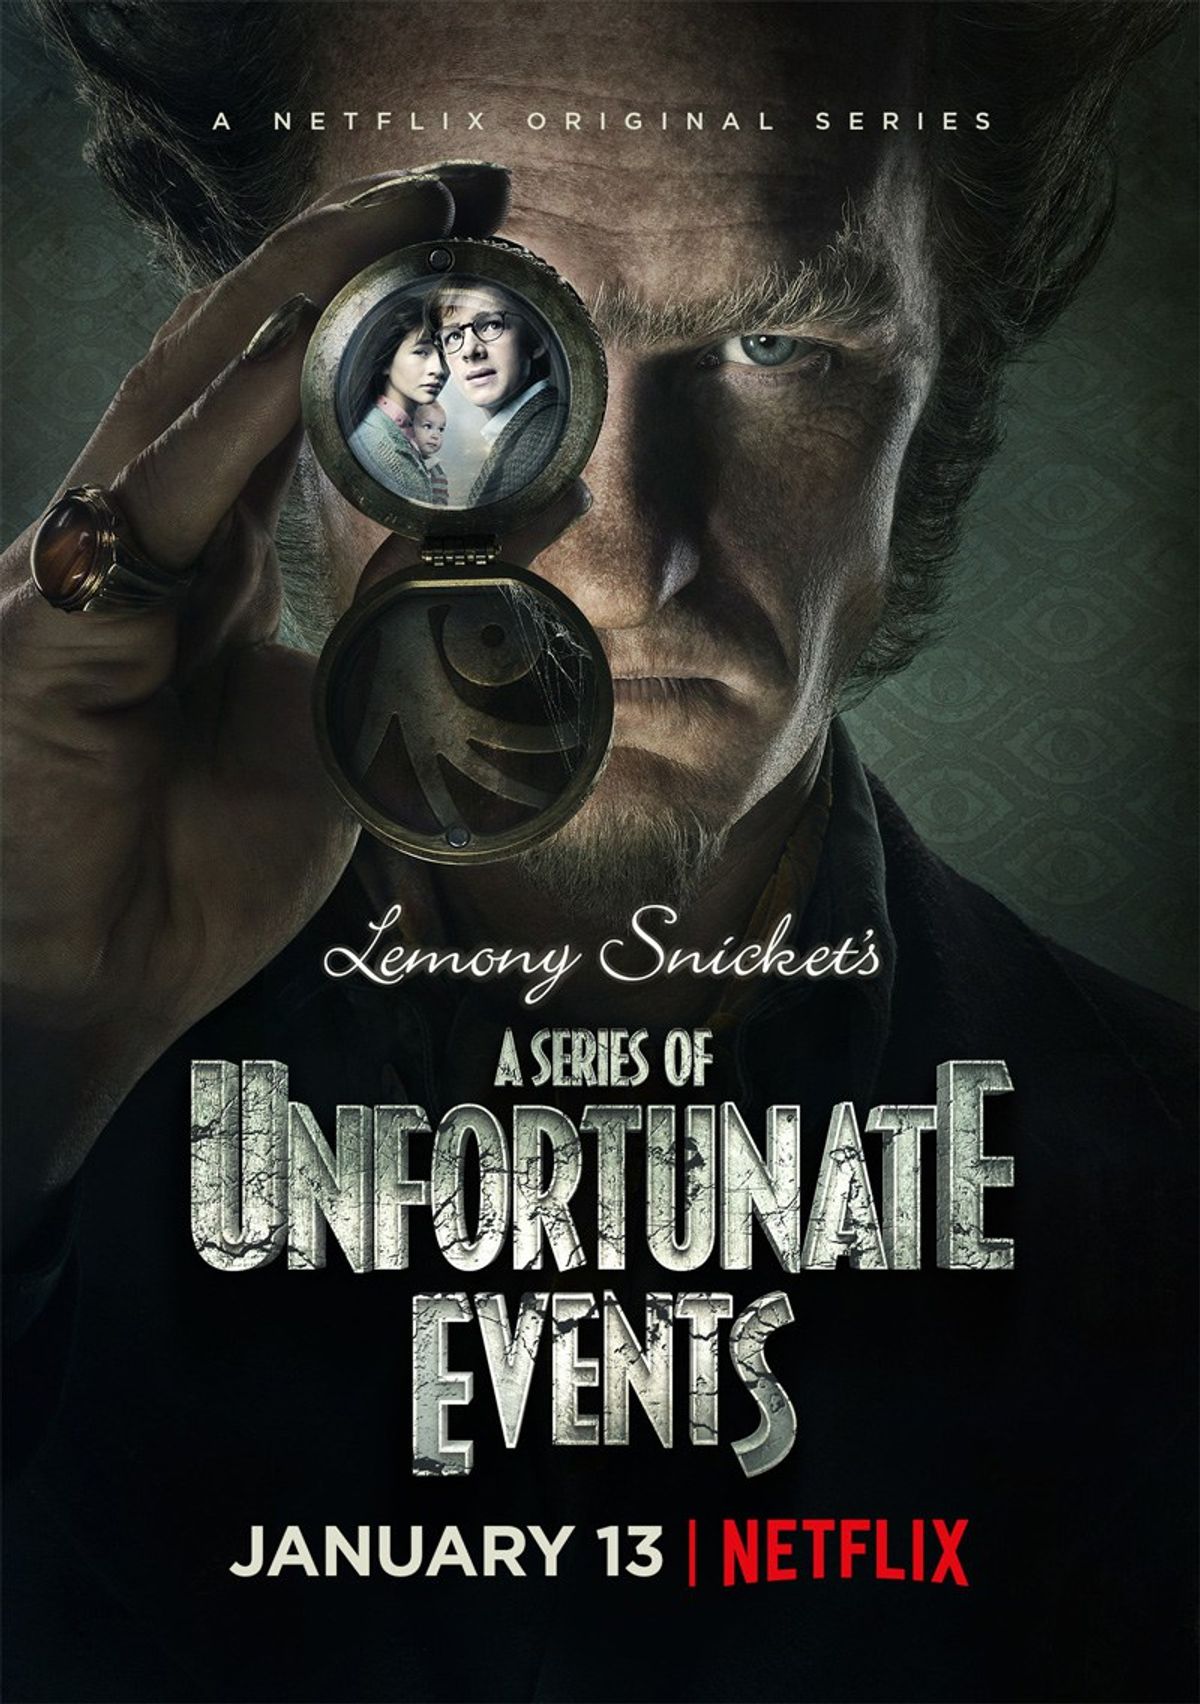 An Annotated Review of A Series of Unfortunate Events